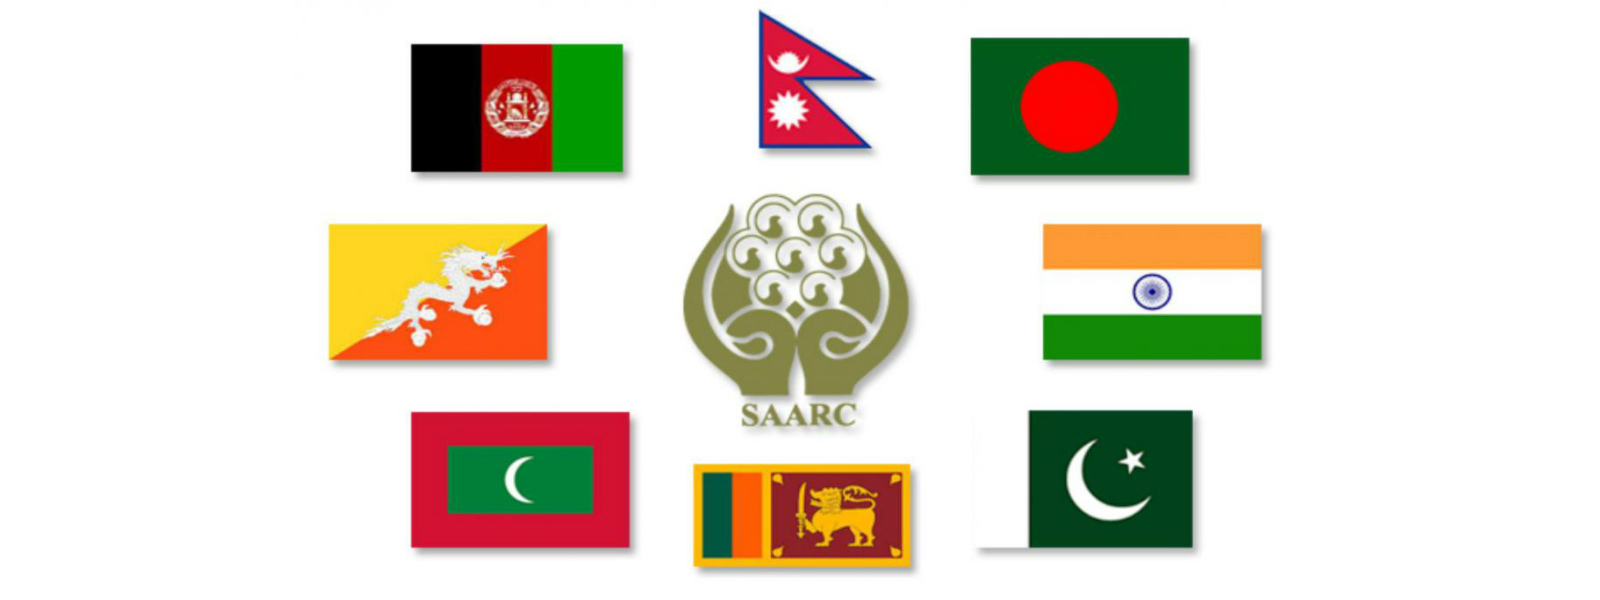 SAARC NCD conference commenced